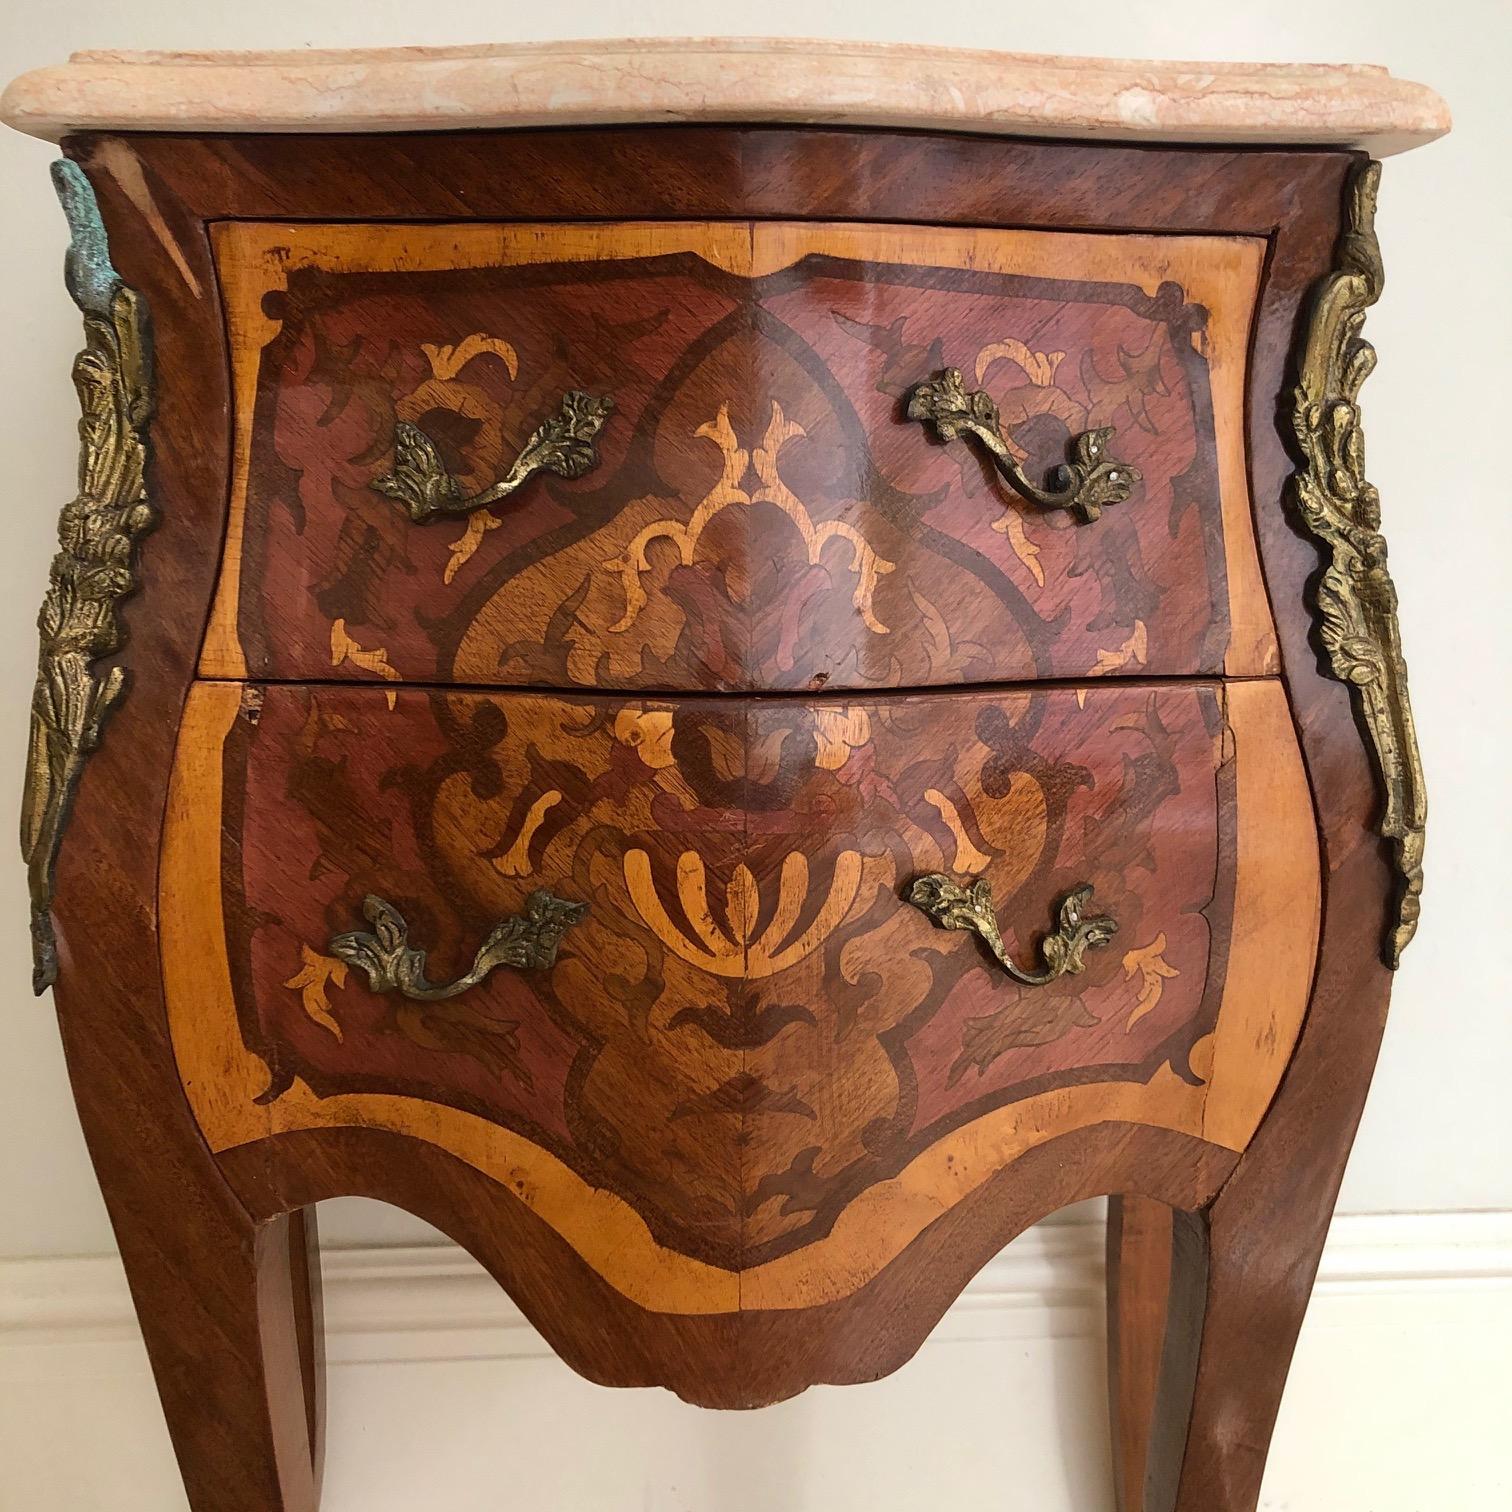 An exceptional Louis XV style mahogany nightstand or side end table having
 gorgeous mahogany wood grain with inlaid marquetry and a pink beveled marble top. The nightstand offer two drawers, and the cases rest on tall cabriole legs with mounted